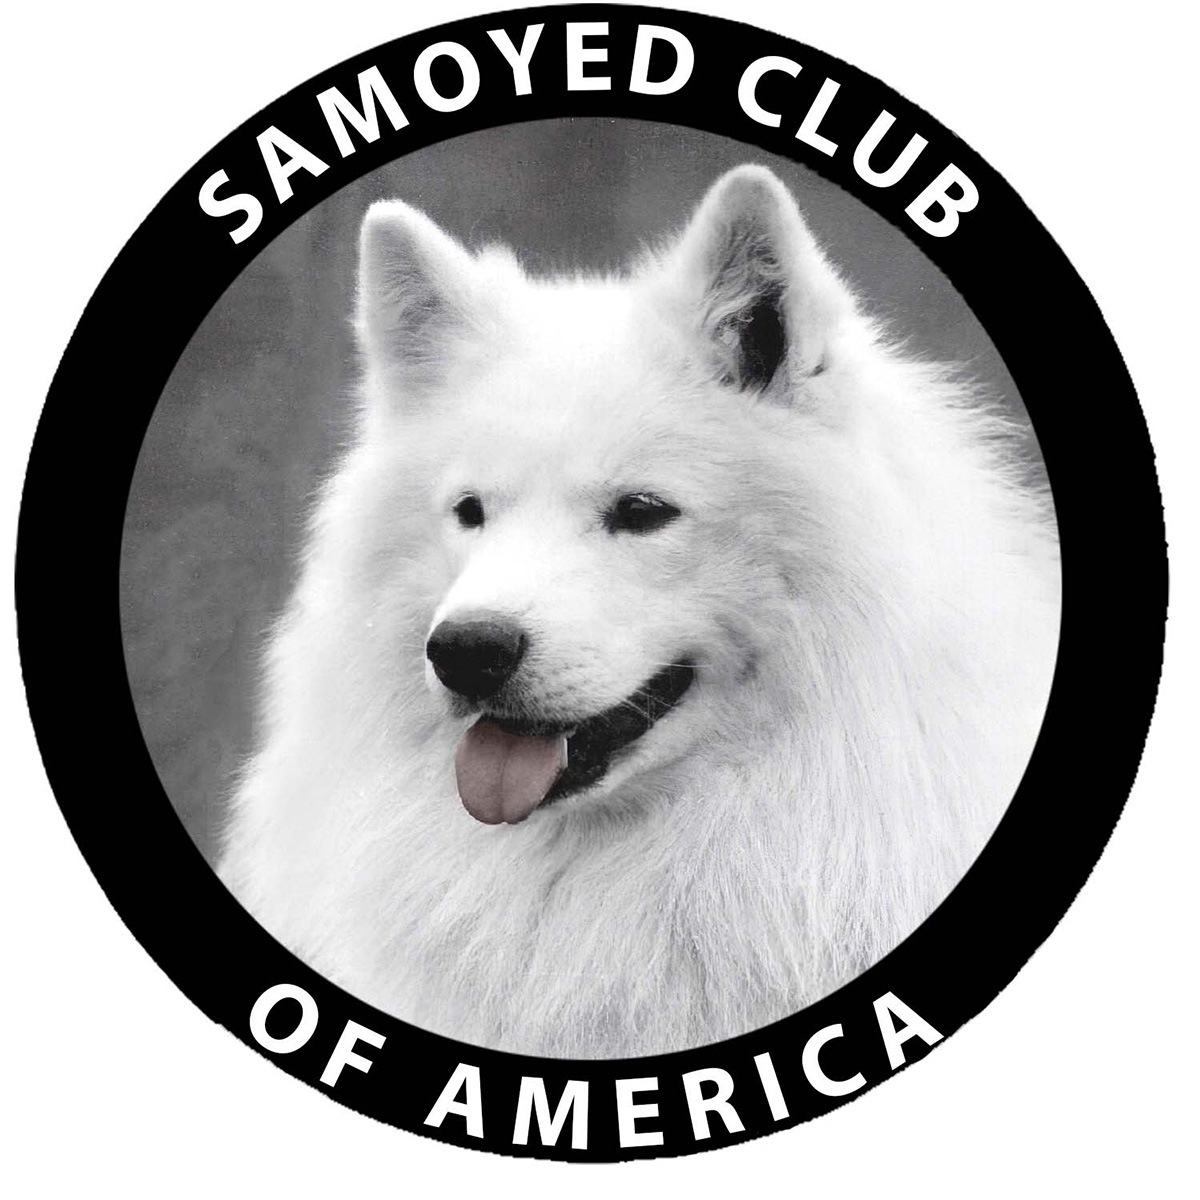 The Samoyed Club of America, Inc. National Specialty 